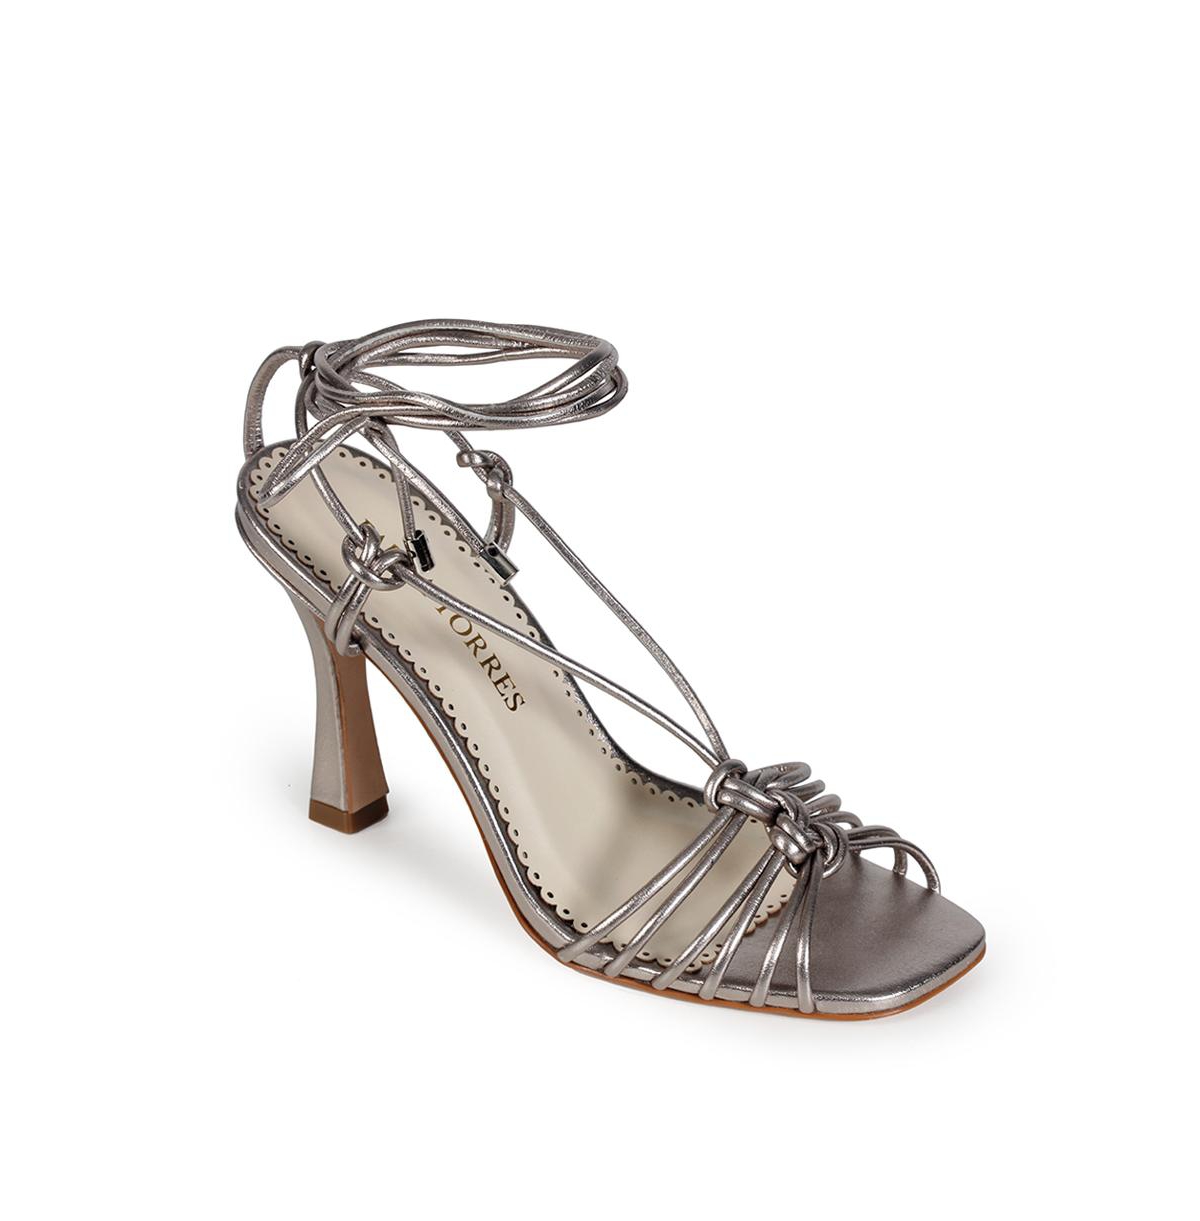 Shoes Women's Blanca Strappy Dress Sandals - Old silver